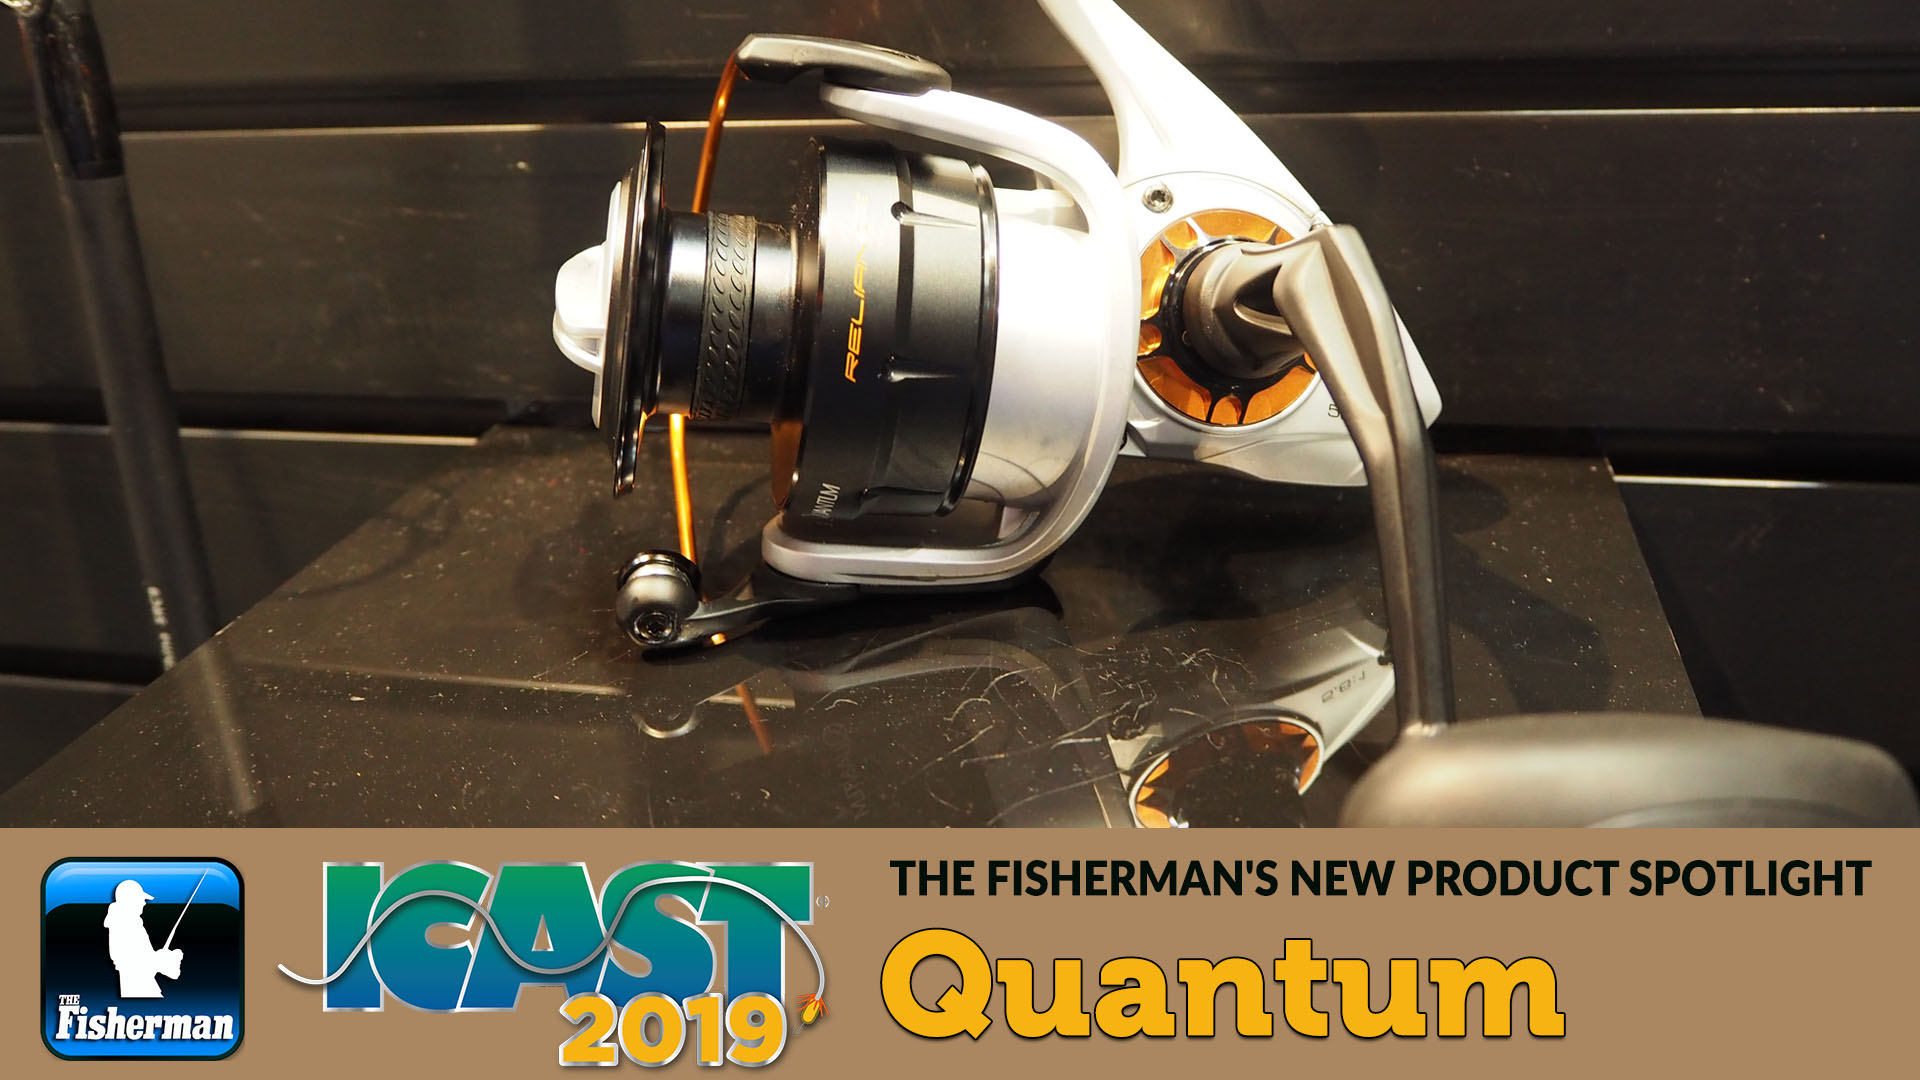 THE FISHERMAN'S NEW PRODUCT SPOTLIGHT - QUANTUM PT RELIANCE - The